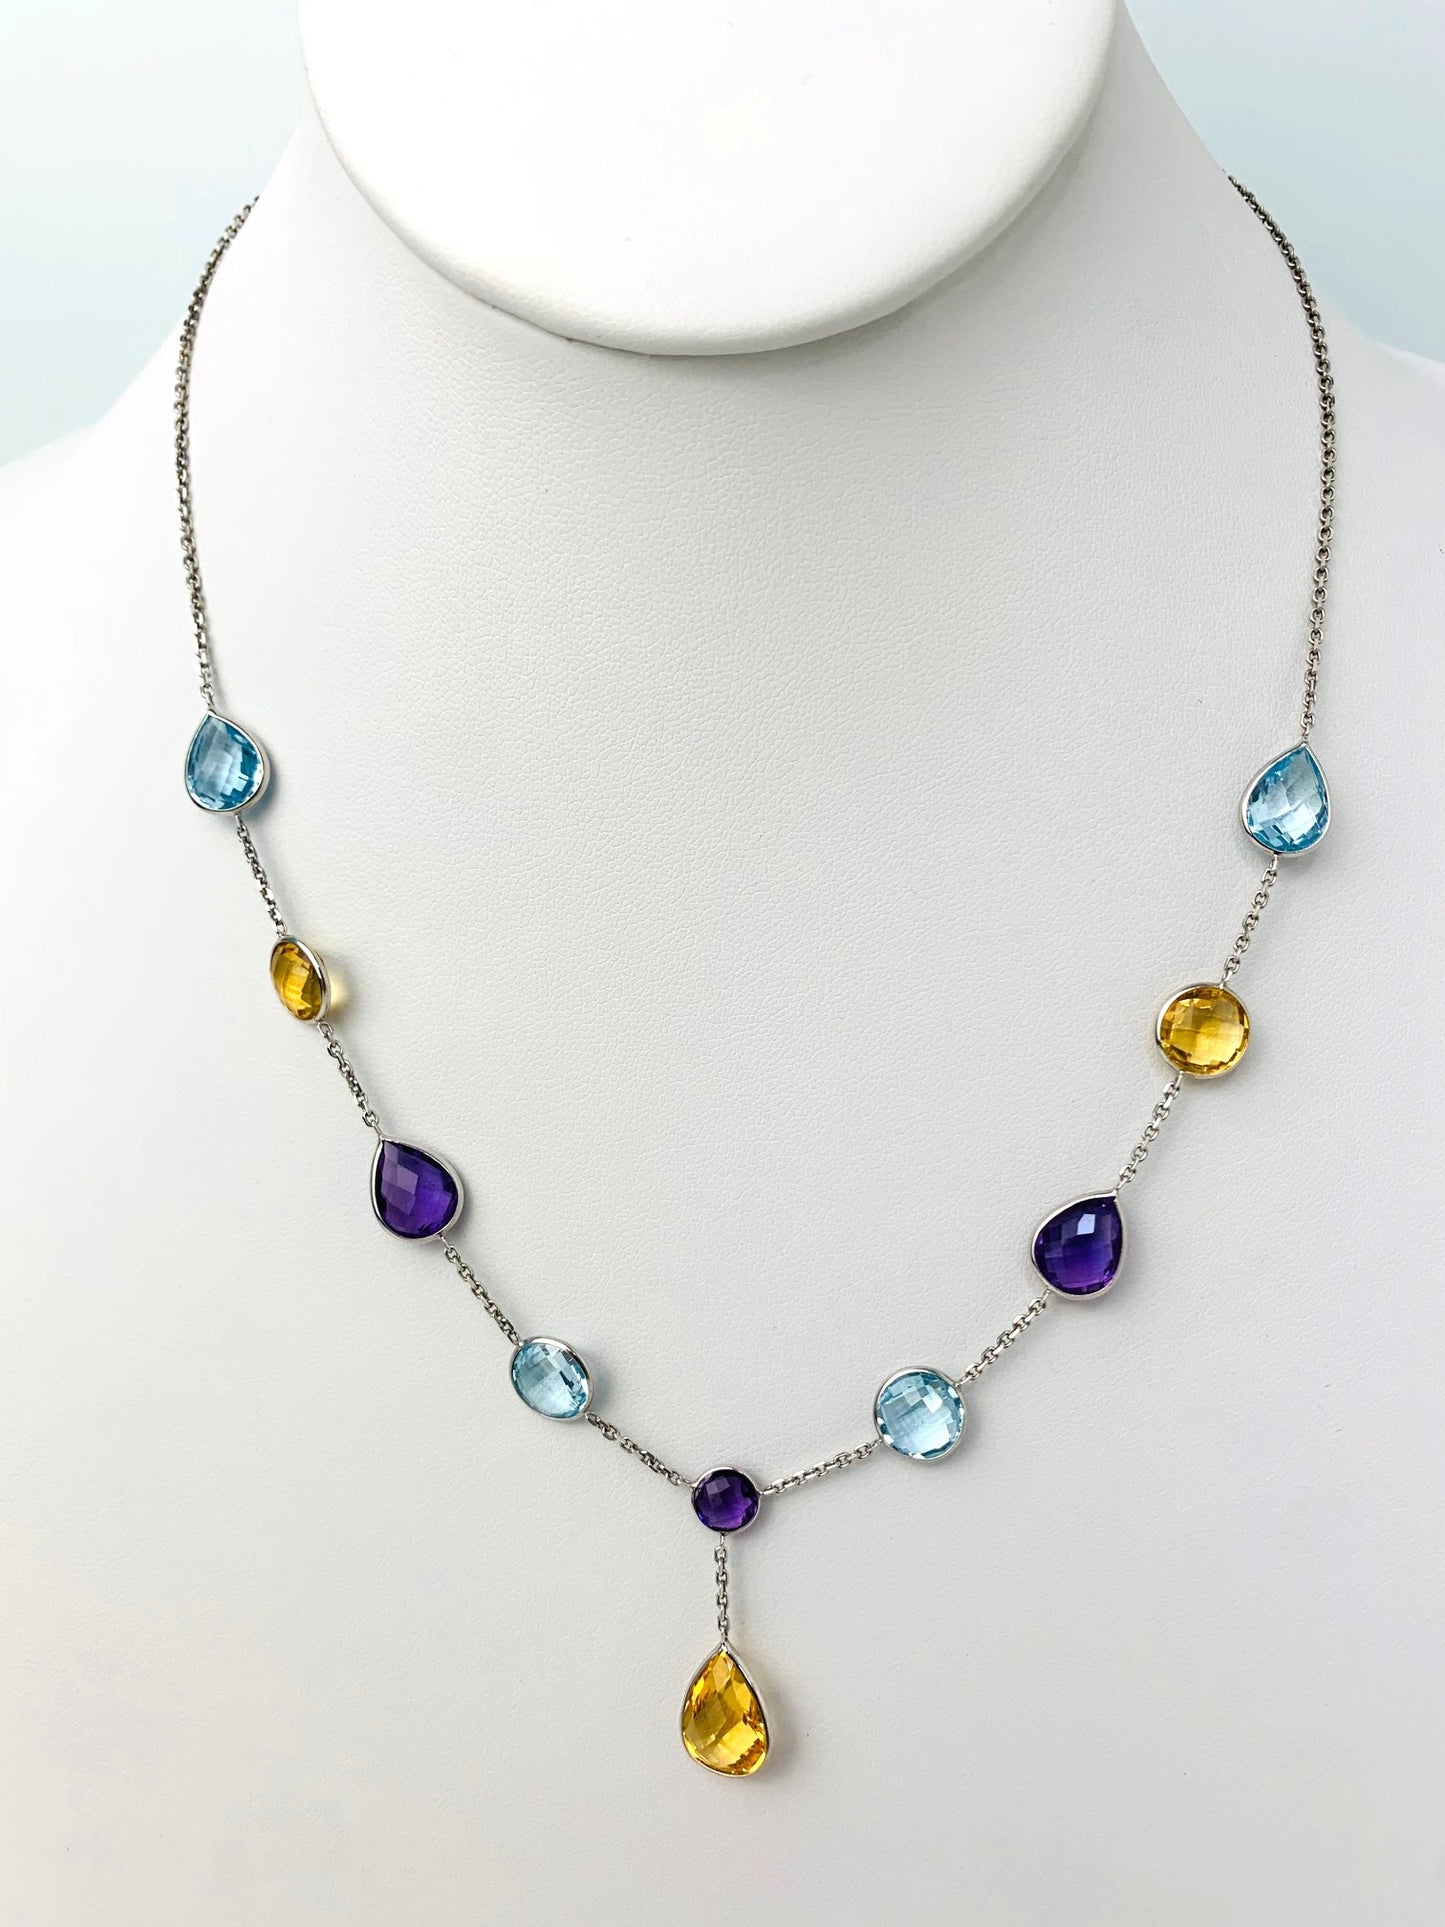 18" Multicolor Round And Pear Briolette Lariat Bezel Necklace With Pear Drop in 14KW - NCK-326-BZGM14W-MLTI-18